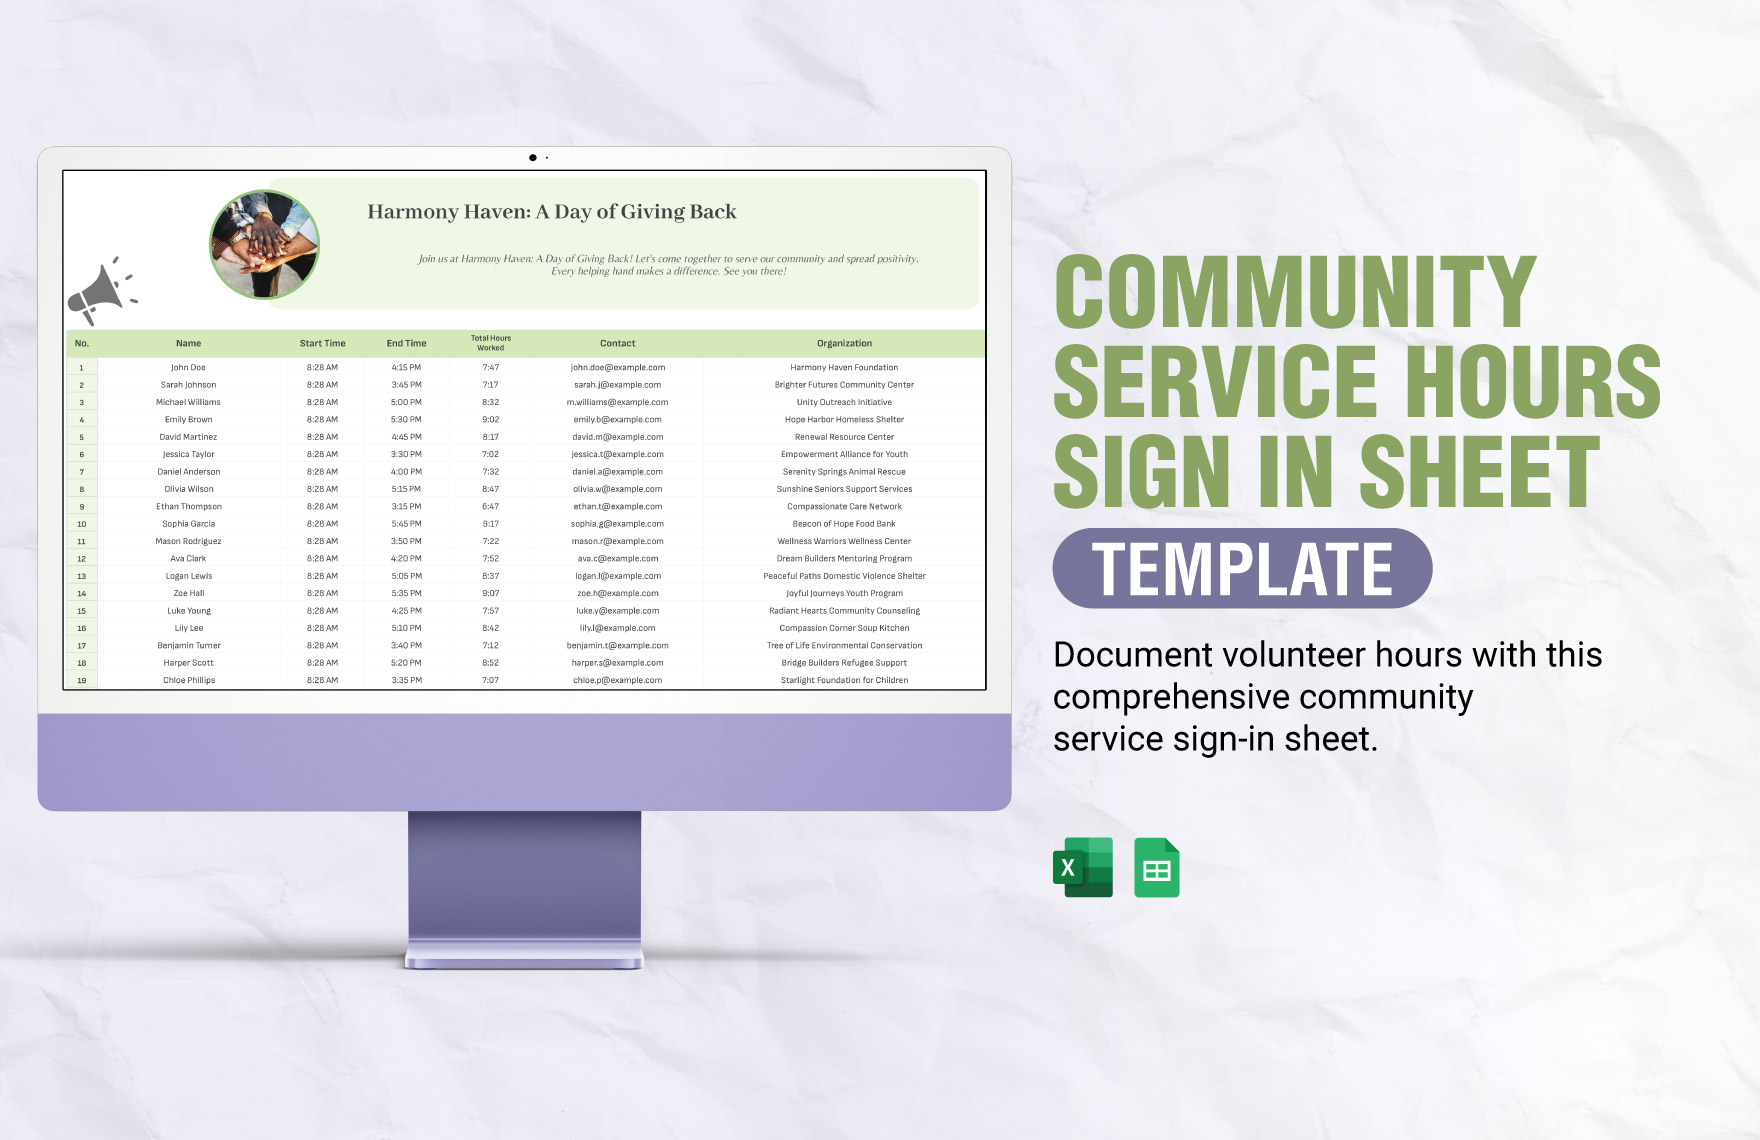 Community Service Hours Sign in Sheet Template